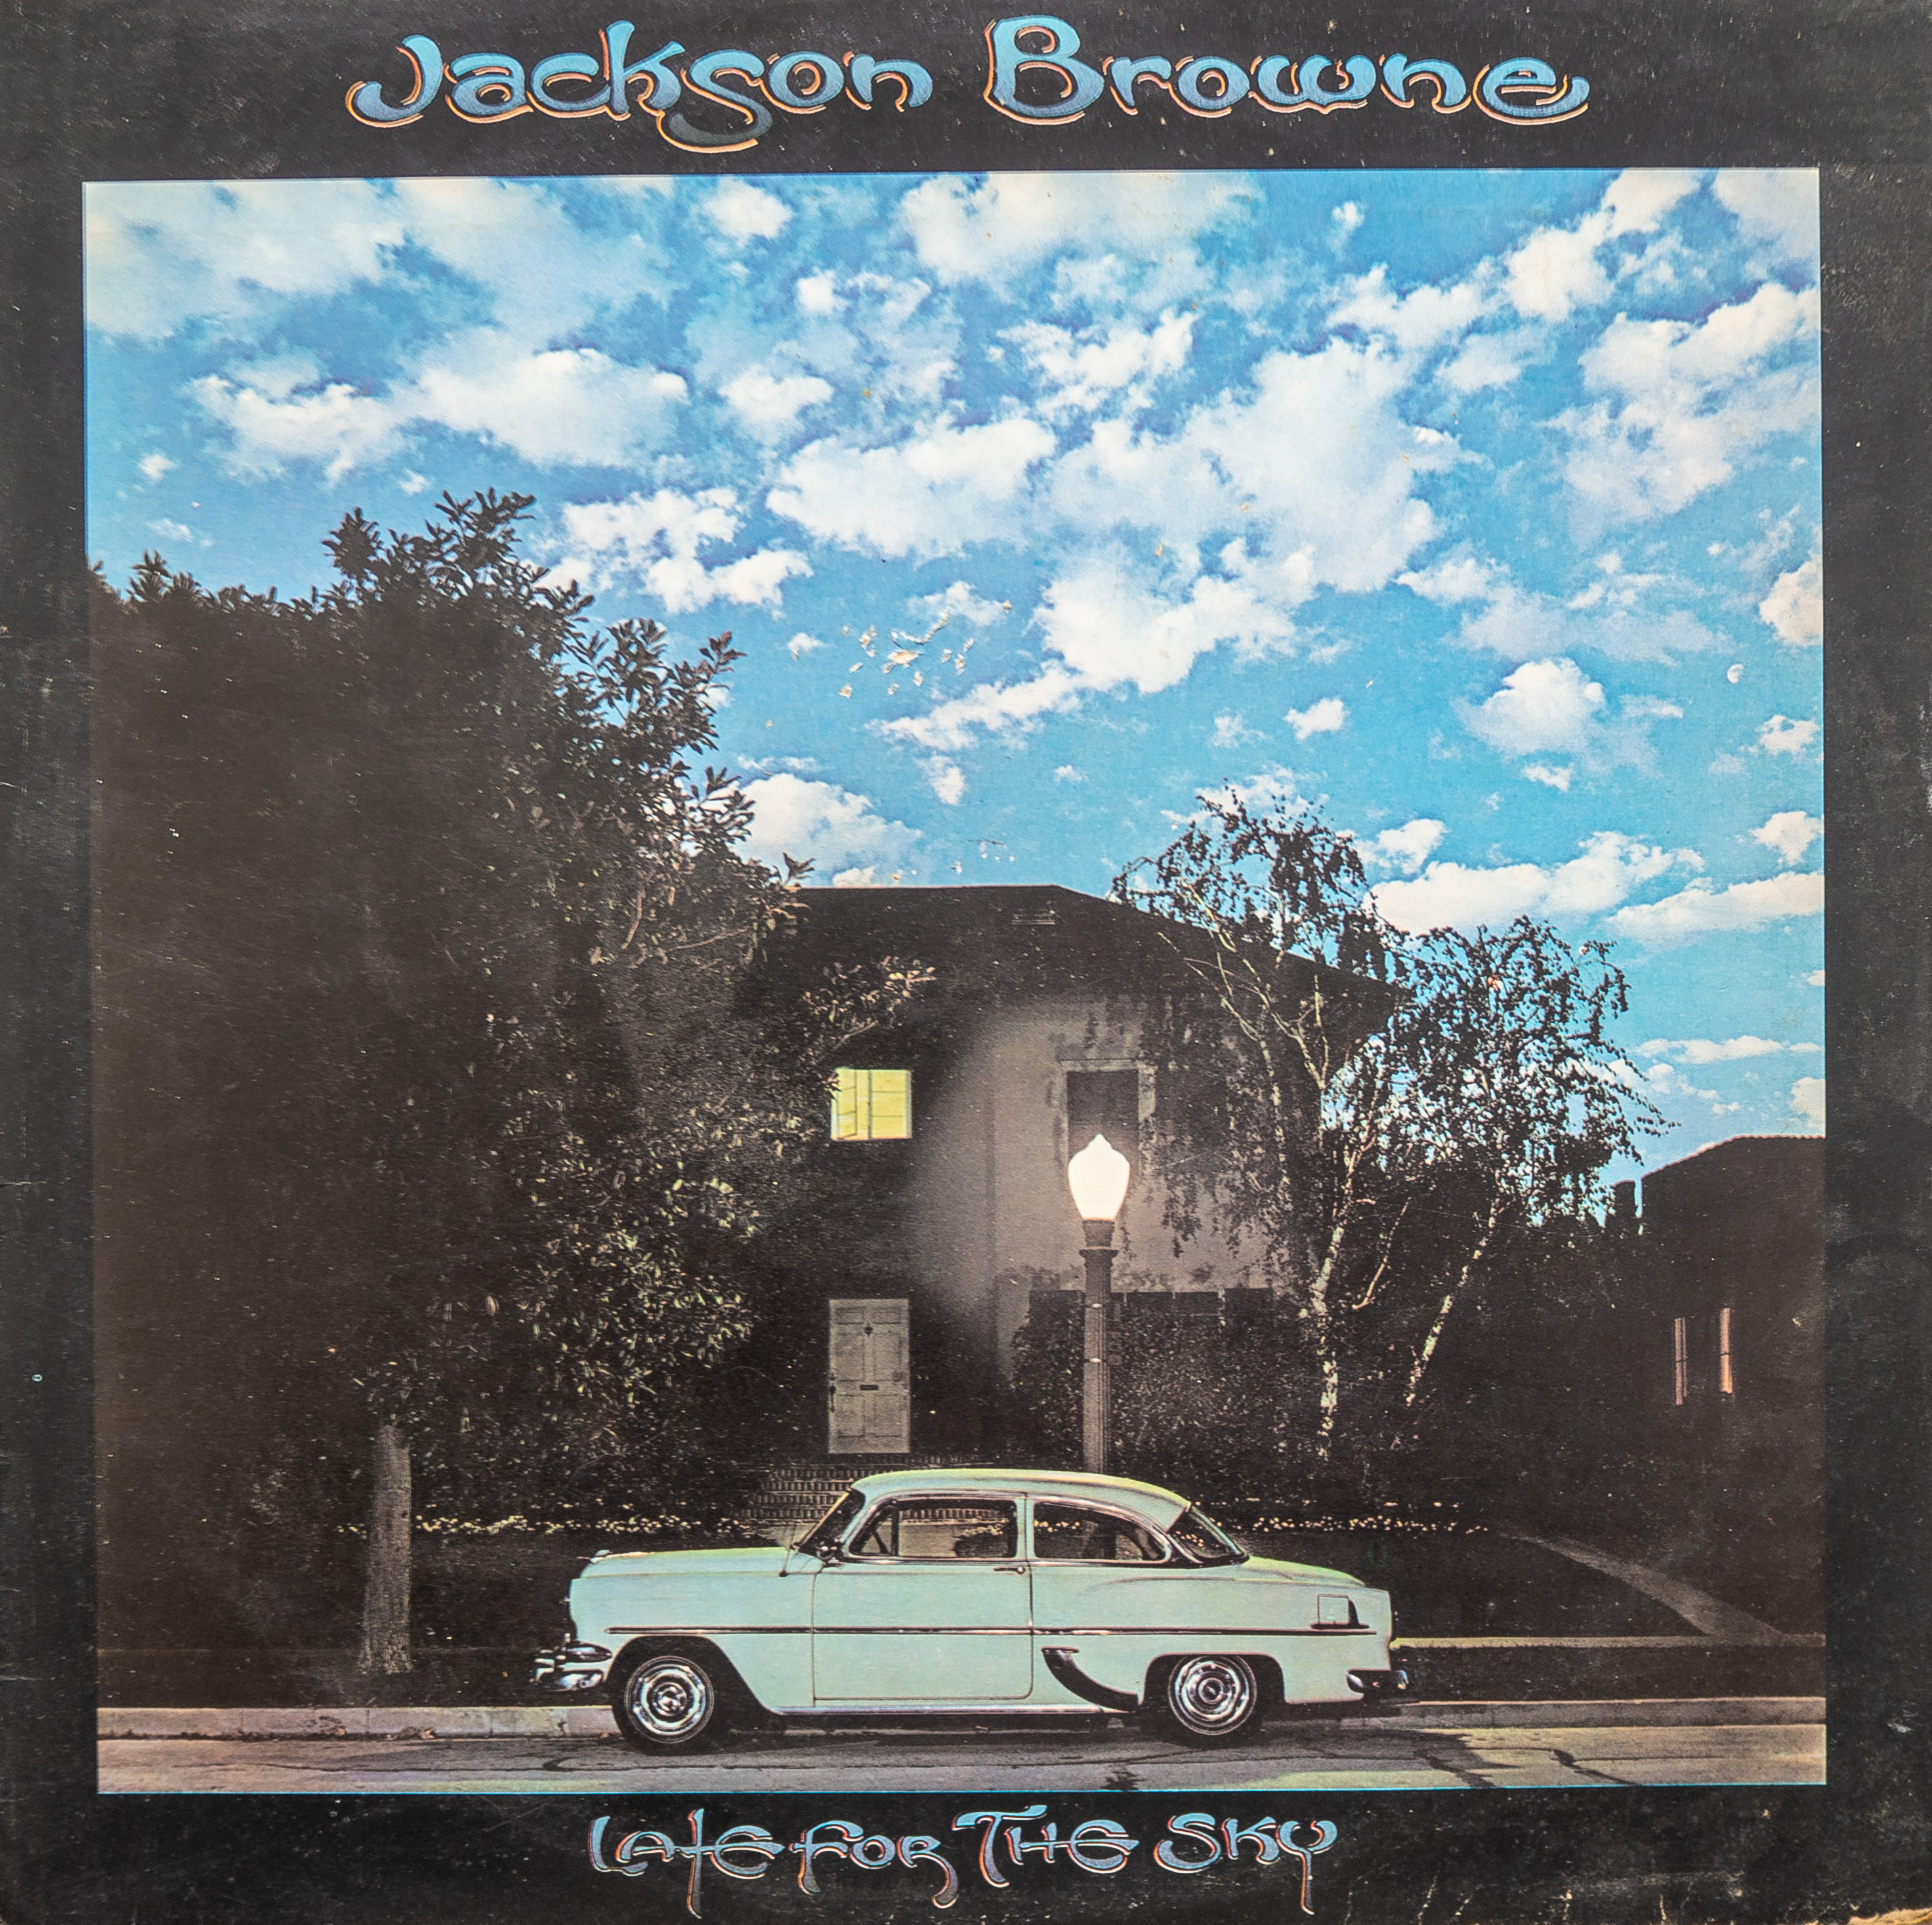 Jackson Browne Late for the sky in vinyl from 1973 with white earlyChevrolet